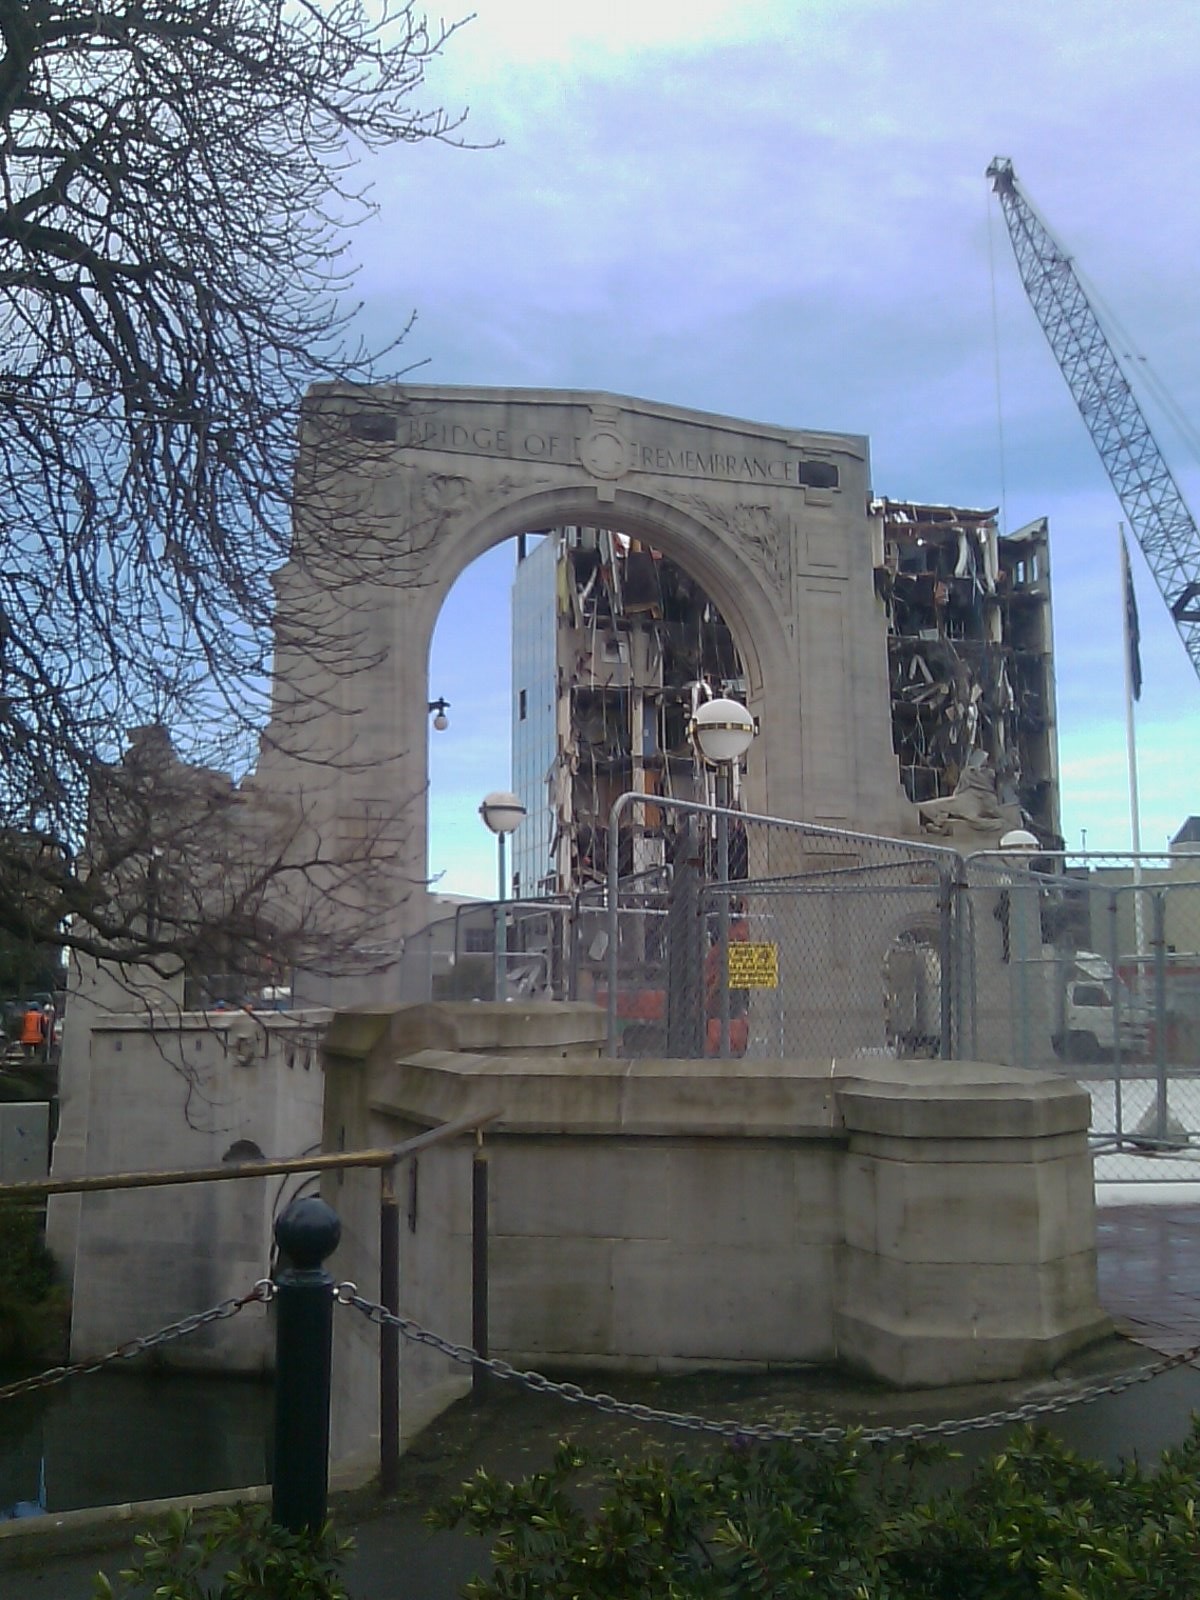 Bridge of Remembrance 1937 and 2011